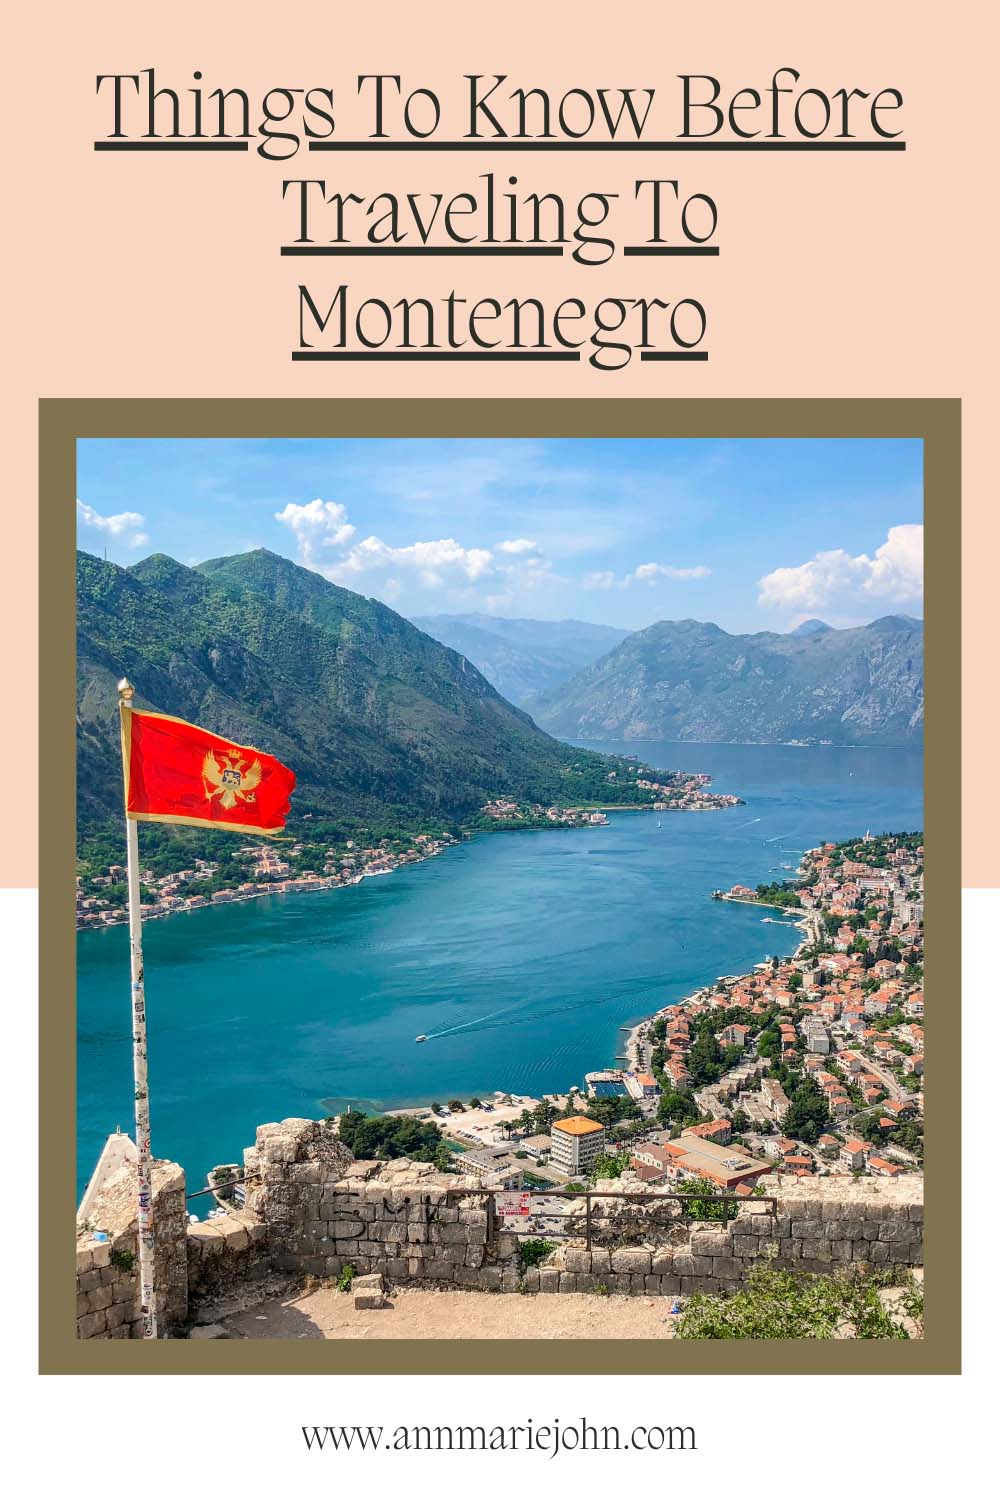 Things To Know Before Traveling To Montenegro